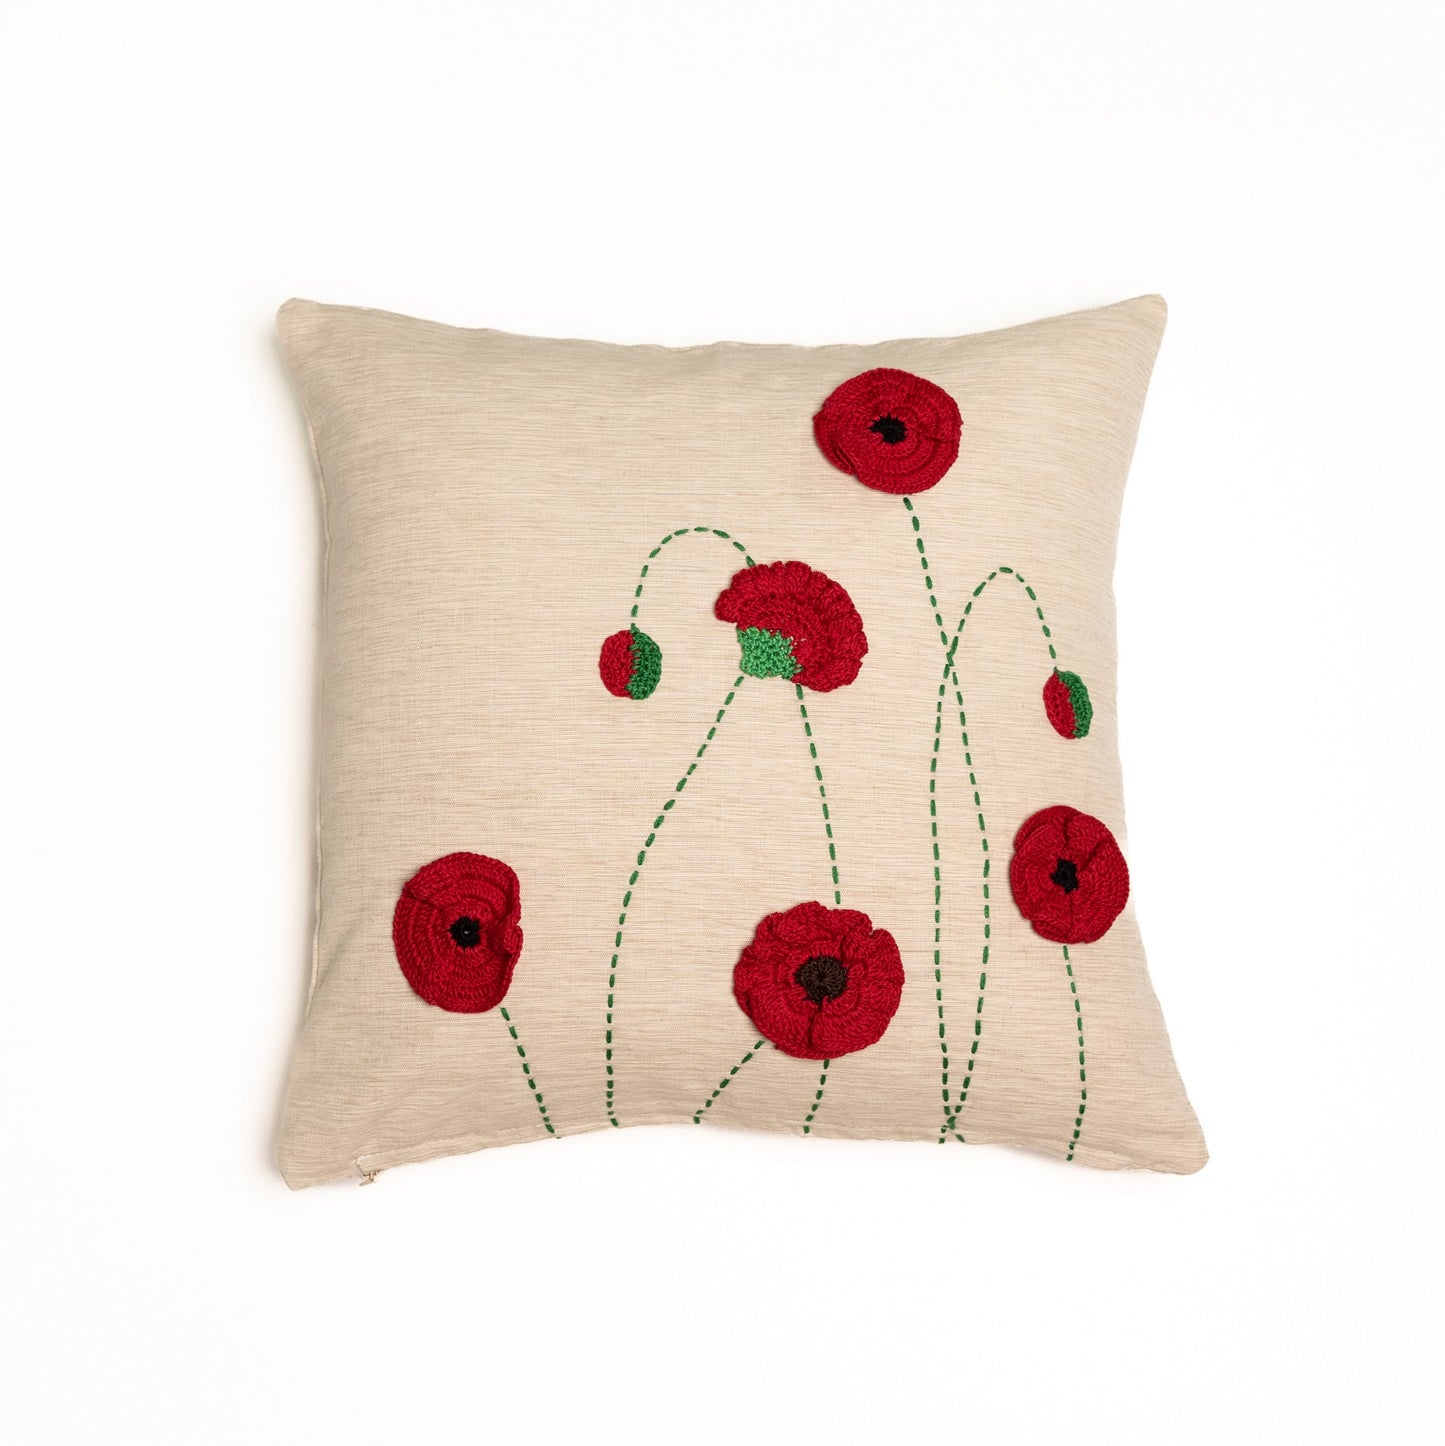 Crochet red poppies cushion cover - Beige